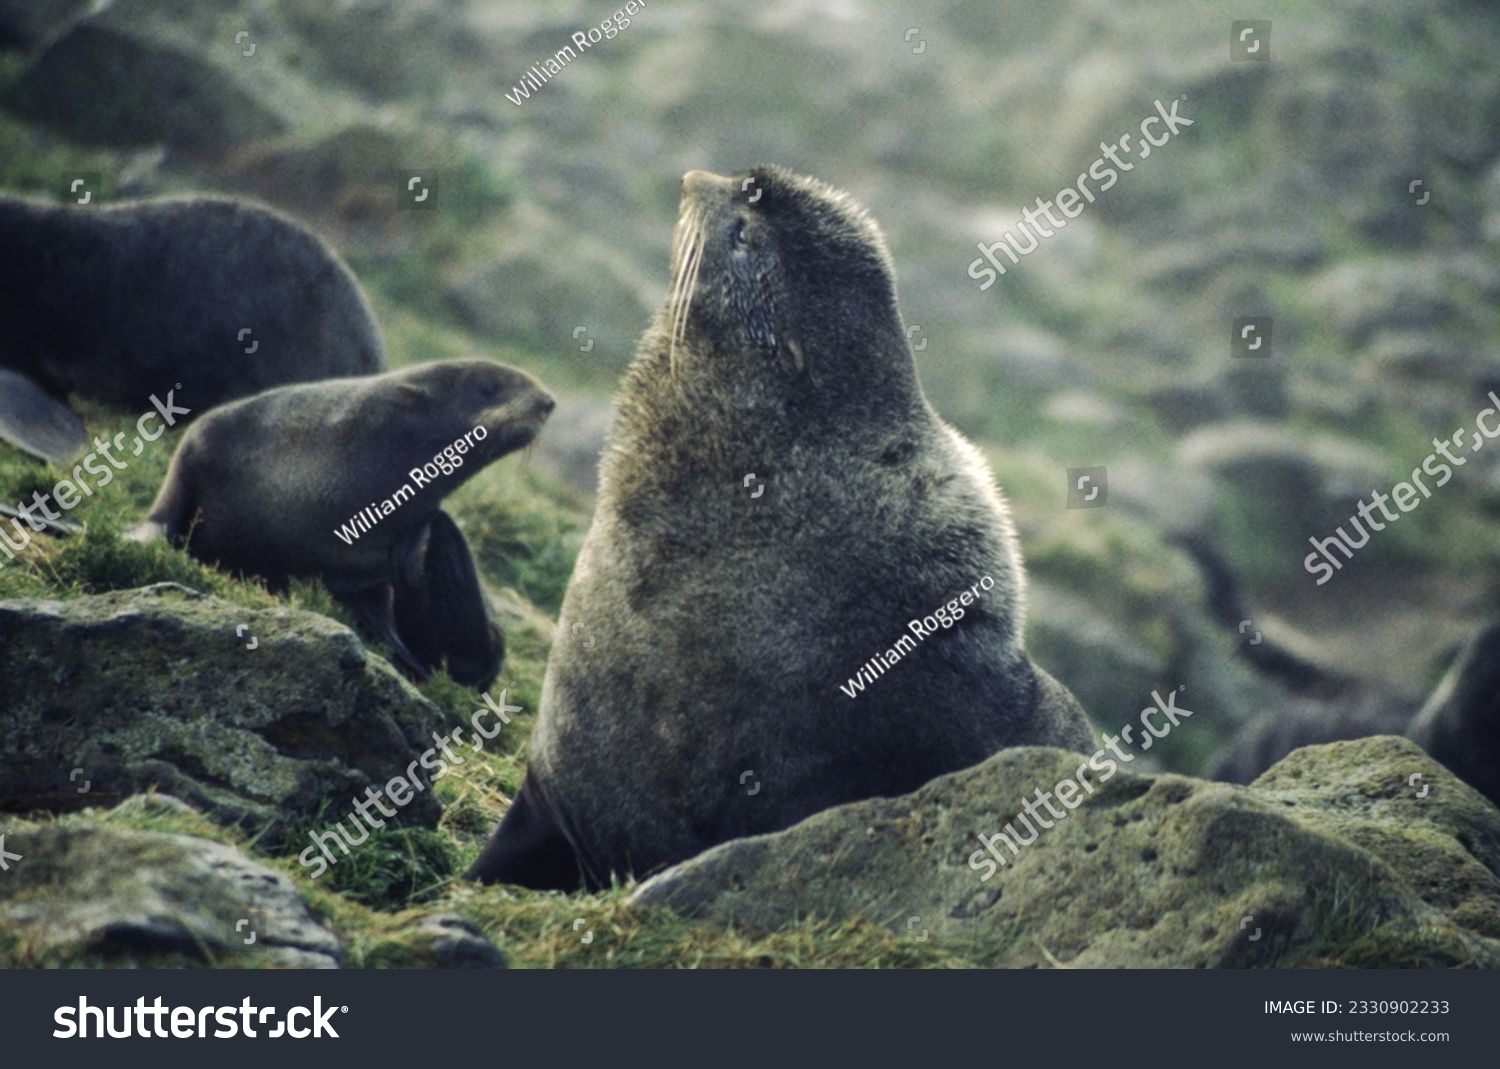 Northern fur seals have a stocky body, small head, very short snout, and extremely dense fur that ends at the wrist lines of their flippers. Their hind flippers can be up to one-fourth body length. #2330902233